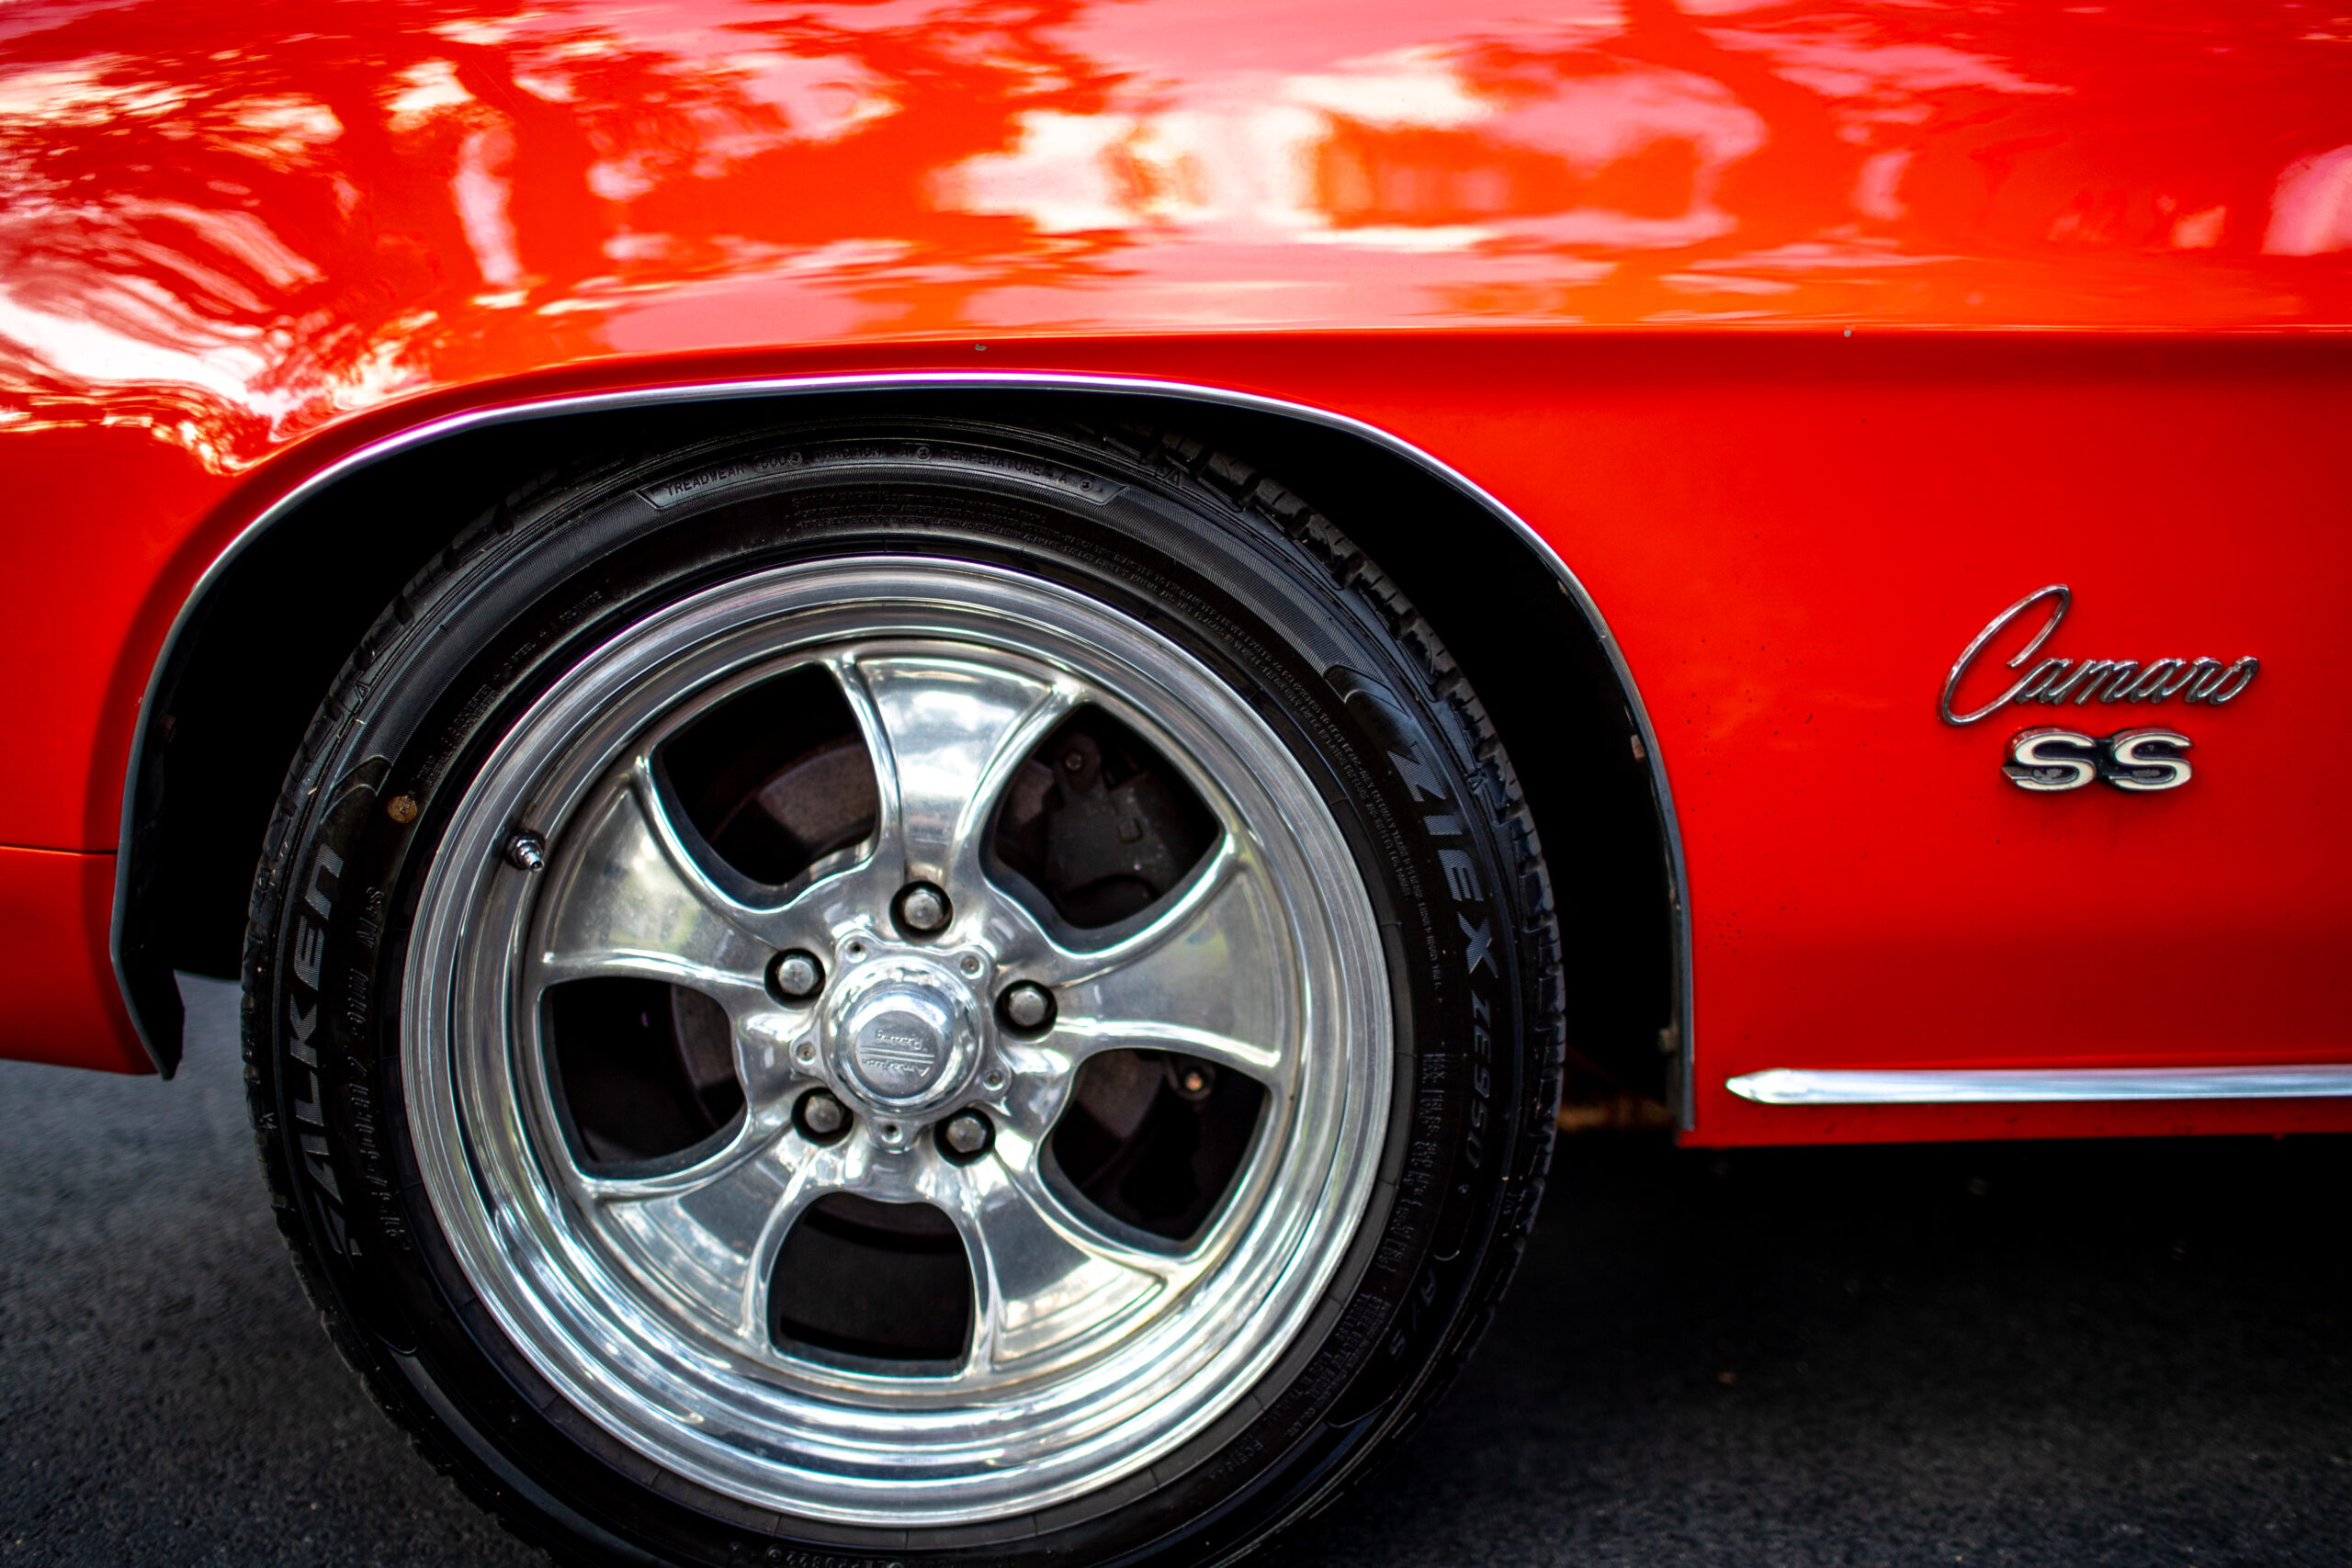 Close-up of a red sports car's wheel and fender, featuring a shiny chrome wheel and "Camaro SS" badge on the side.